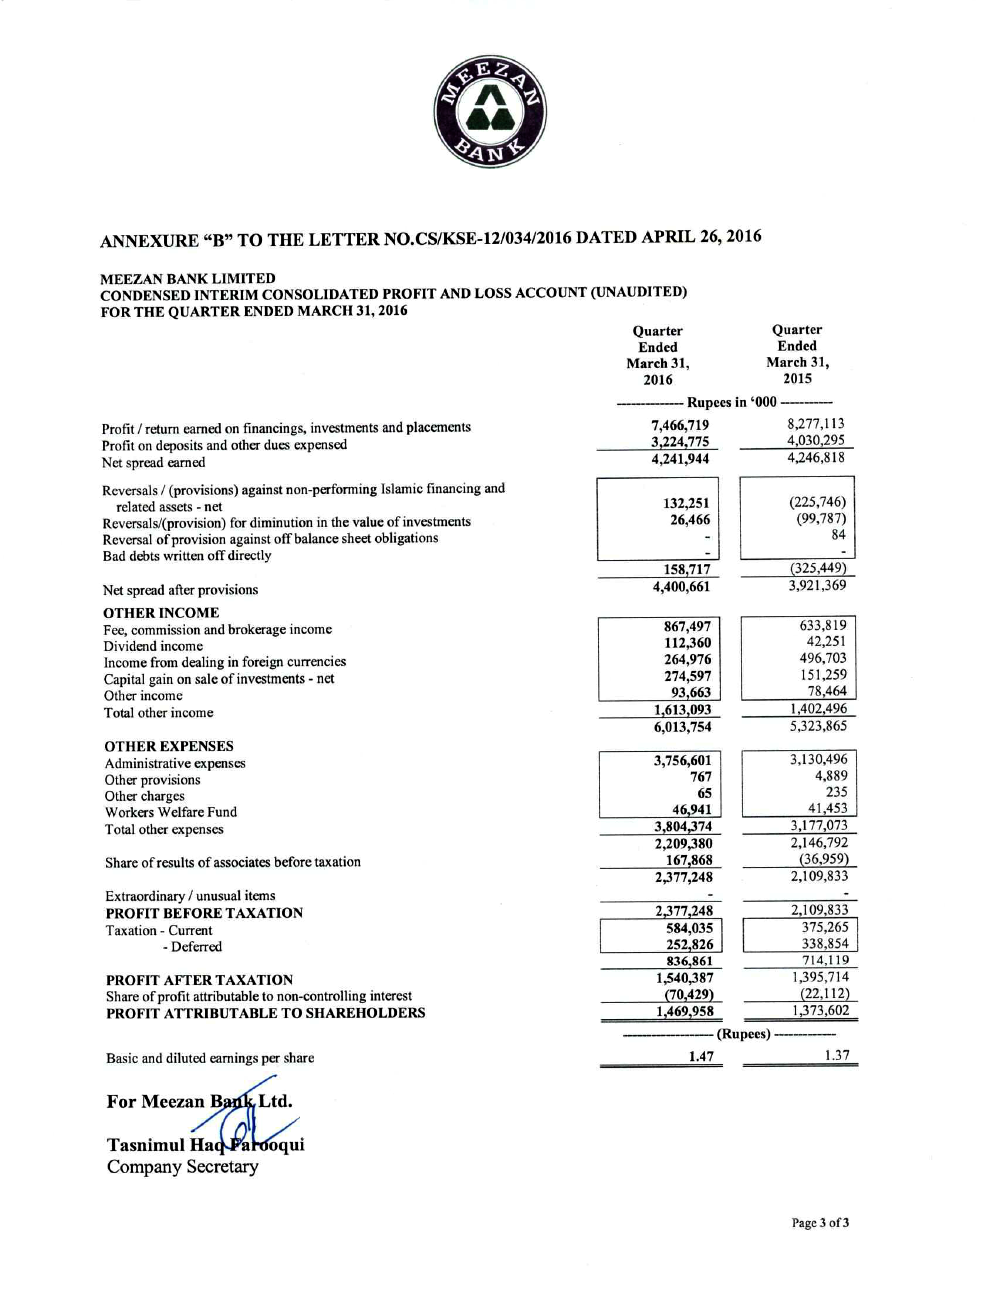 Financial Results for the Quarter Ended March 31, 2016 (3) 26 Apr 2016